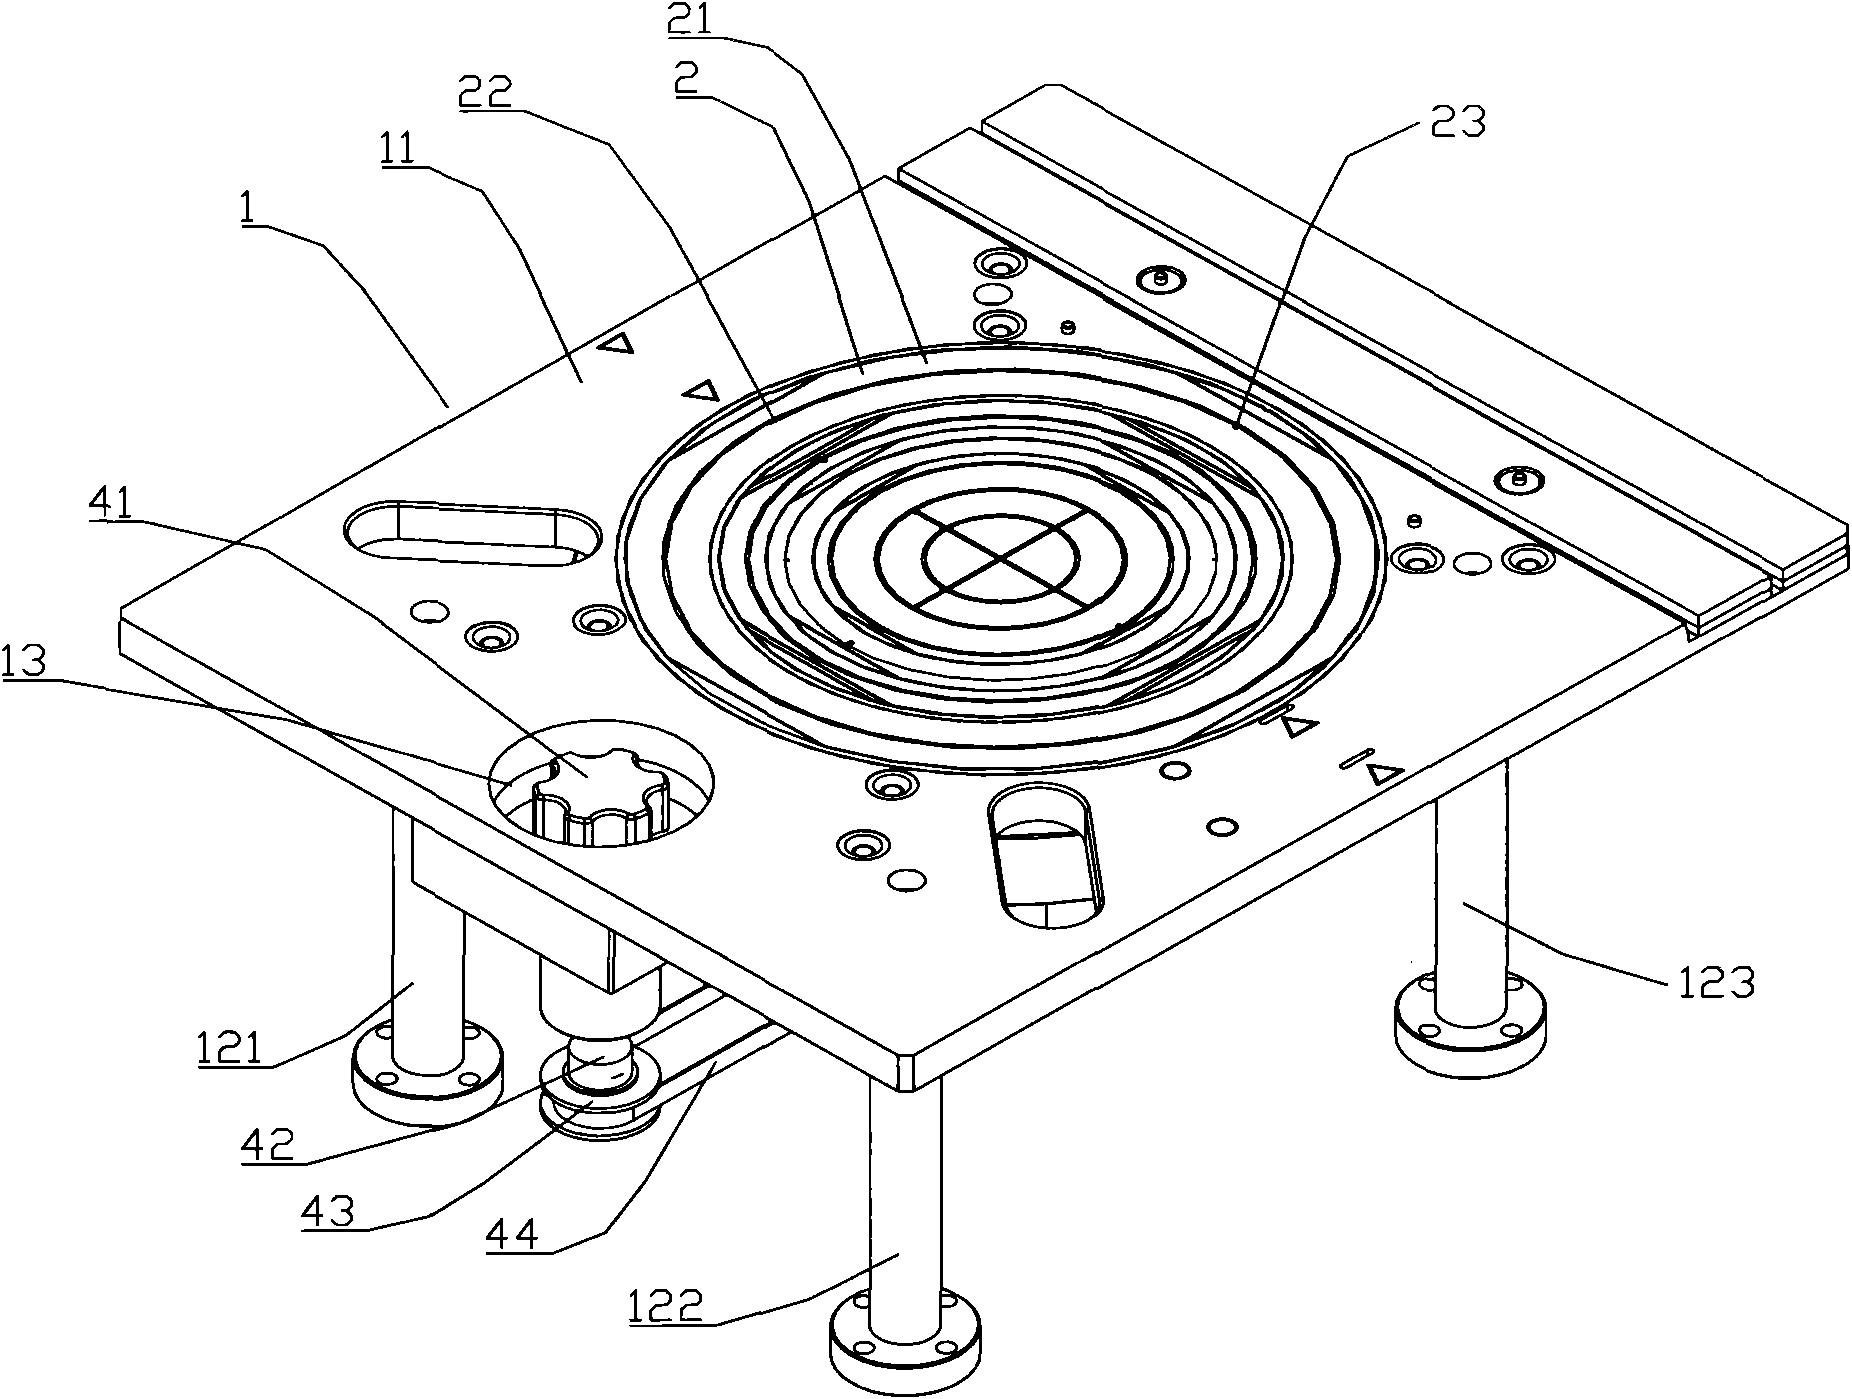 Wafer carrying device